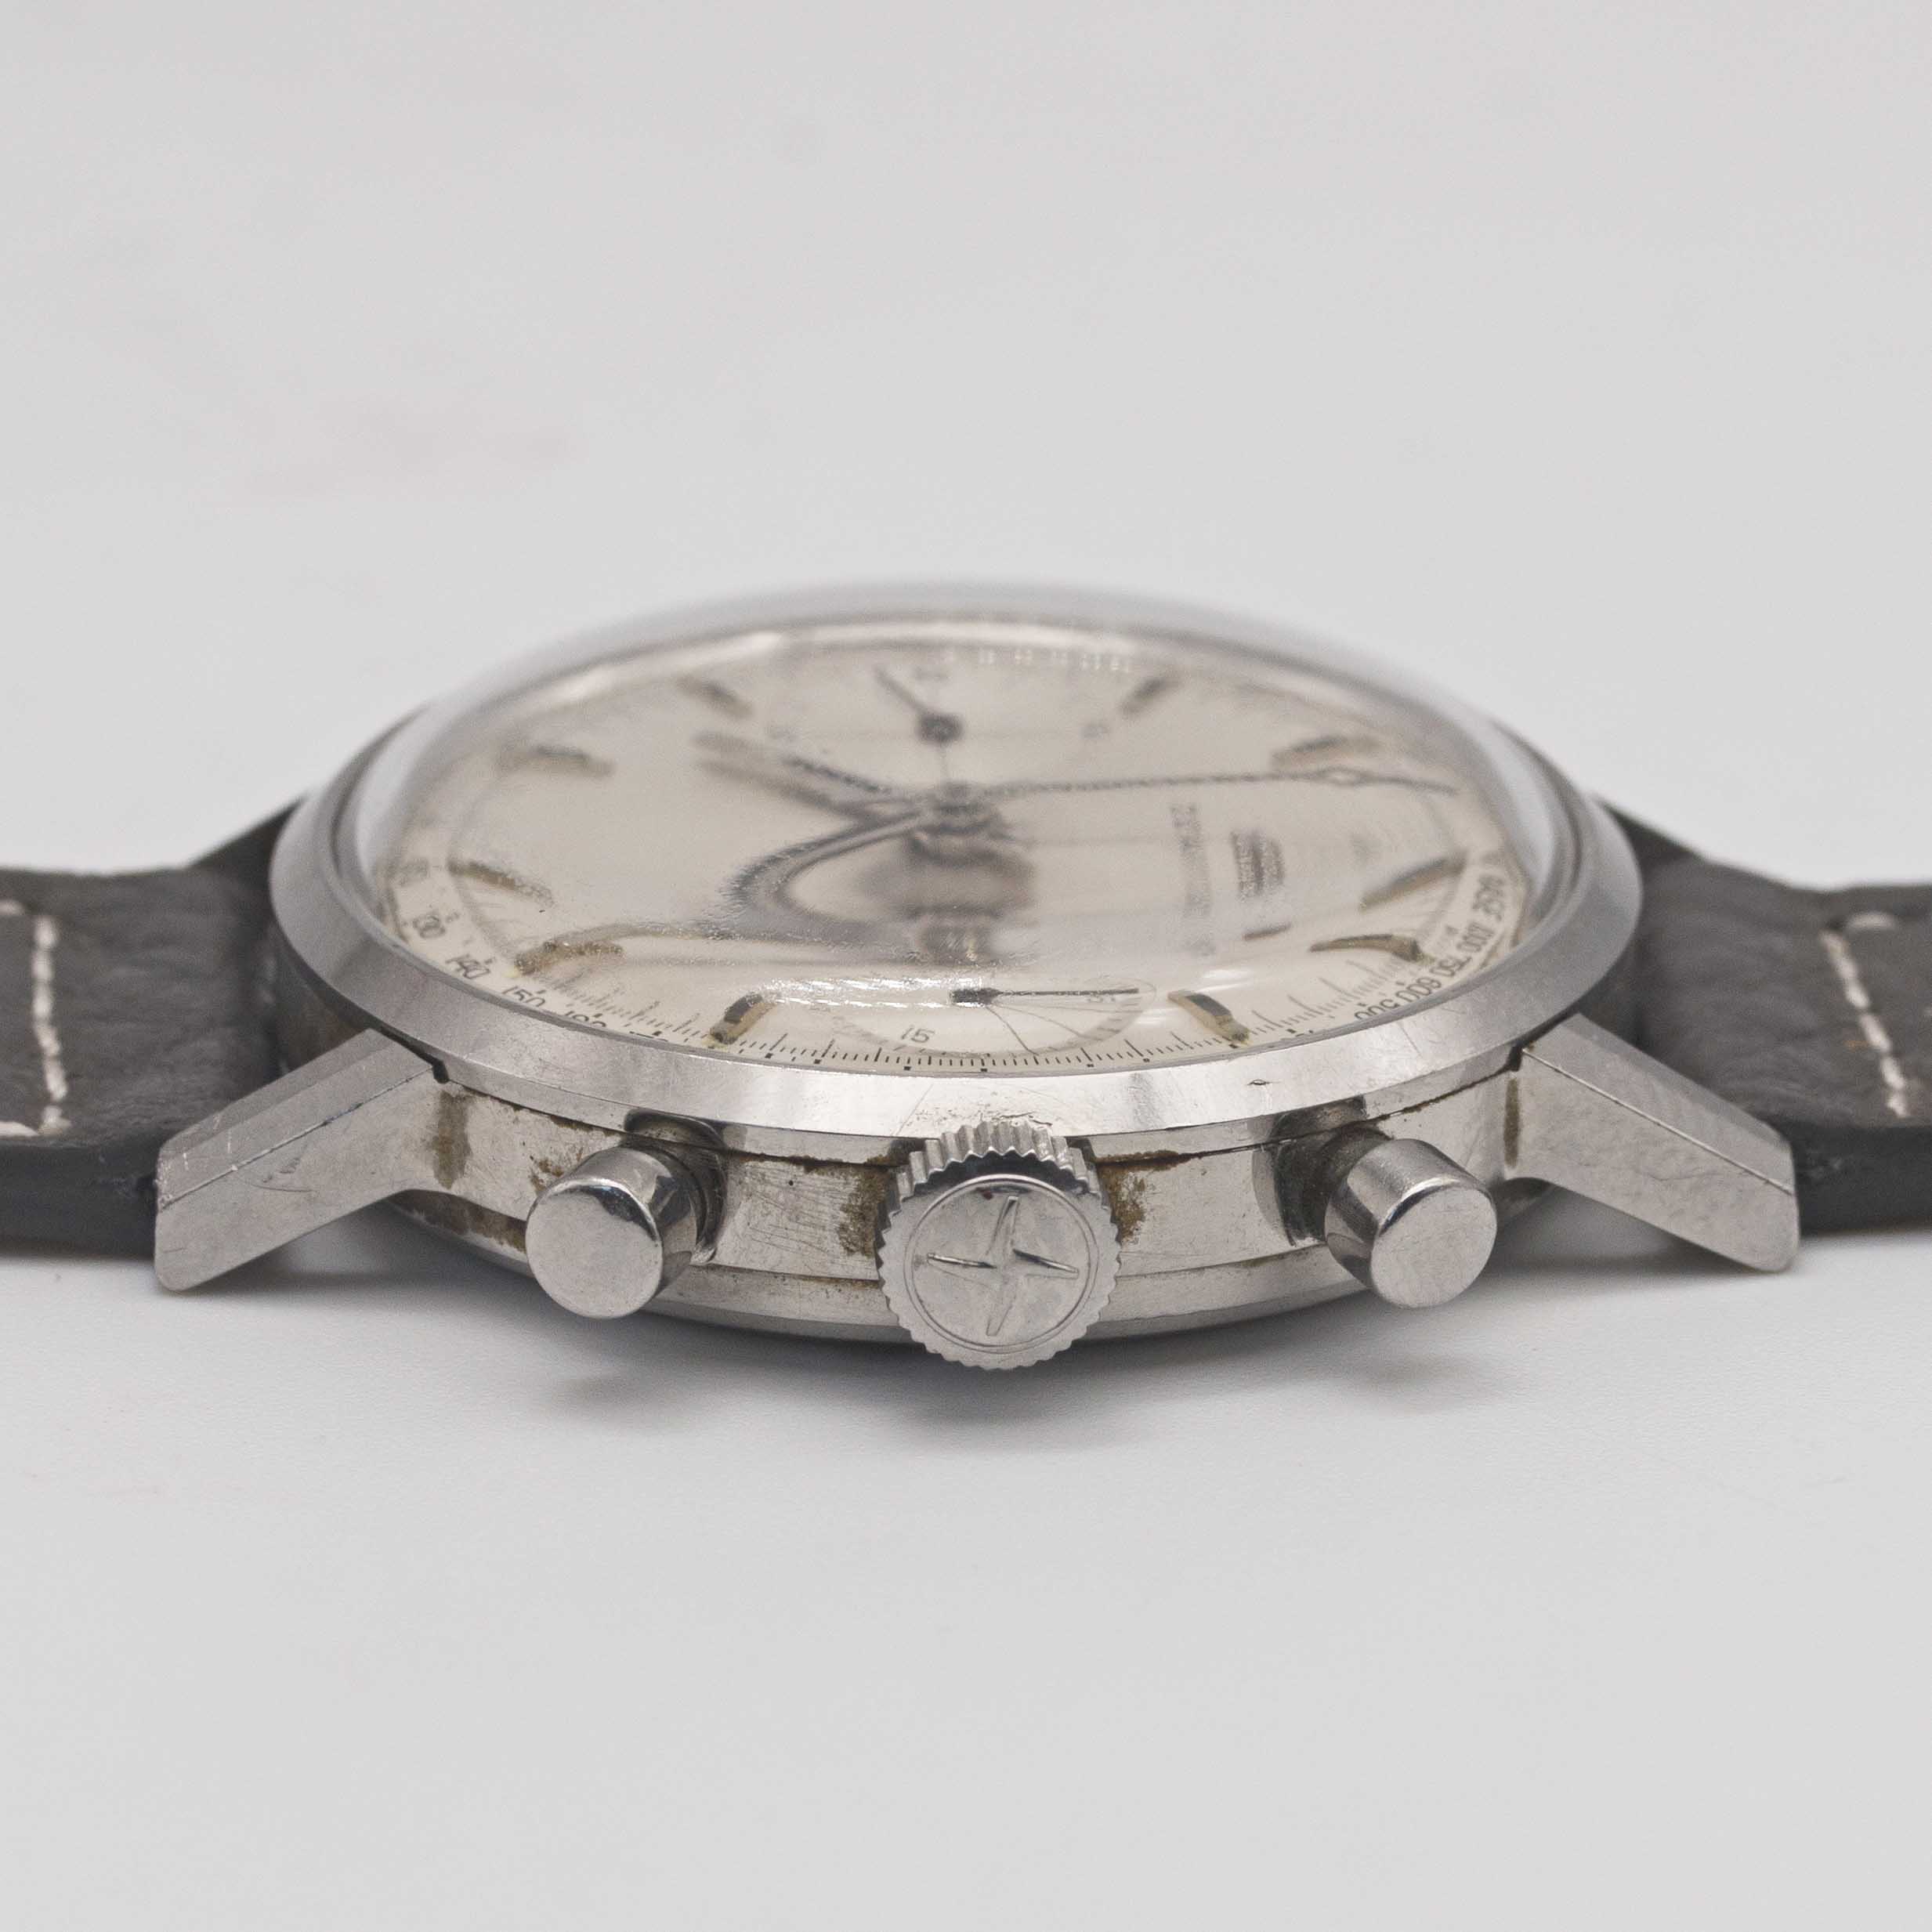 A GENTLEMAN'S STAINLESS STEEL ZENITH CHRONOGRAPH WRIST WATCH CIRCA 1960s, REF. A271  Movement: - Image 8 of 9